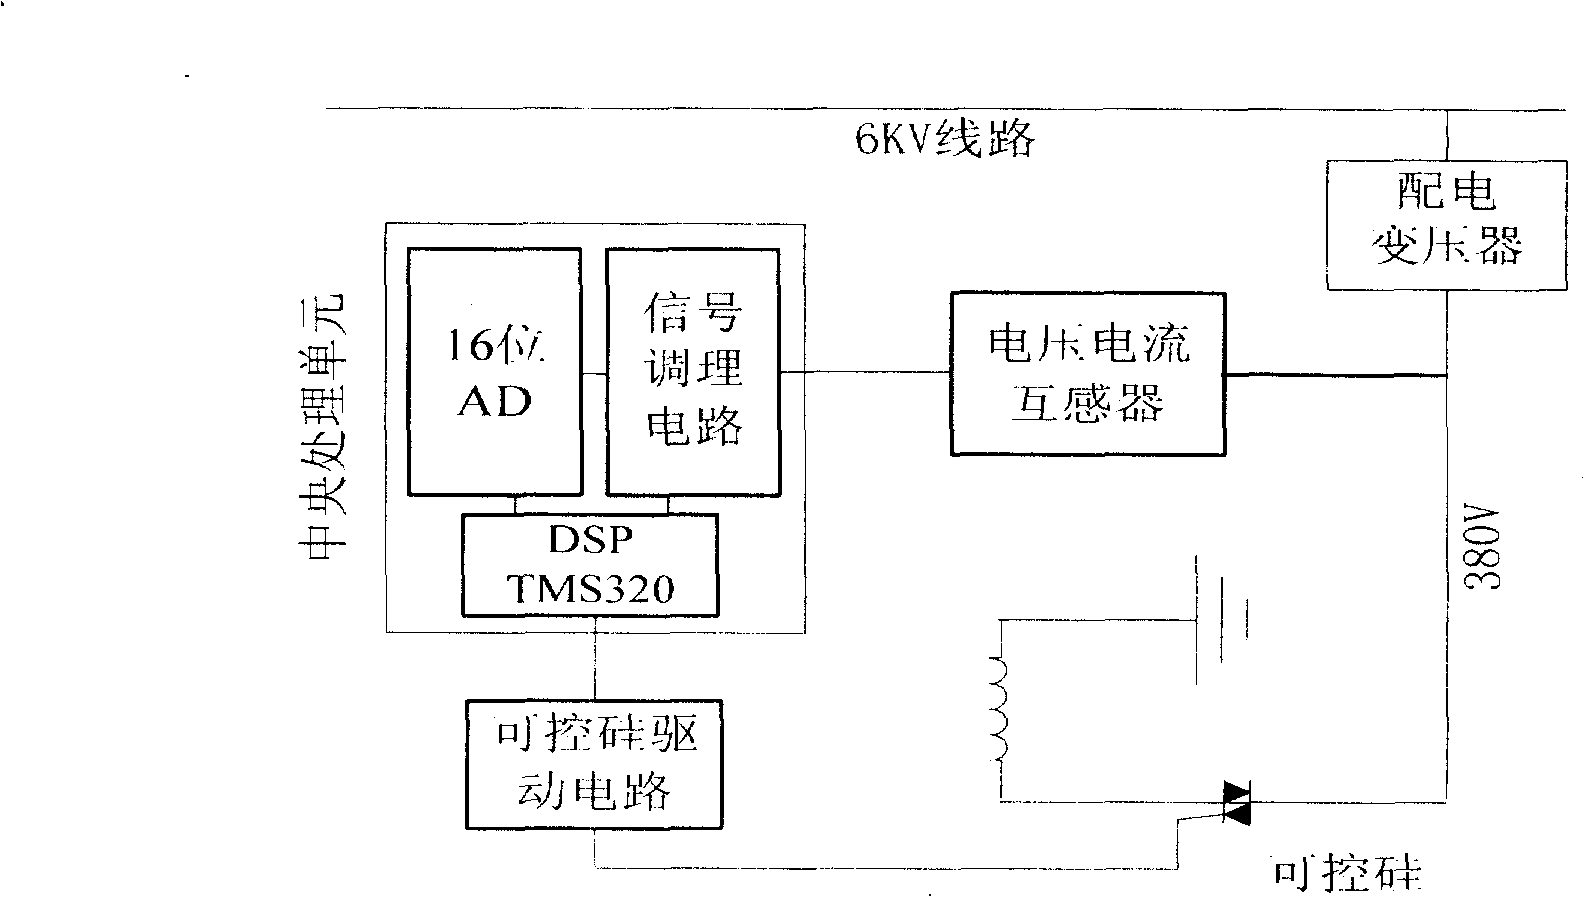 Remote monitoring method and system of electric motor of oil extractor based on power-frequency communication of electric wires